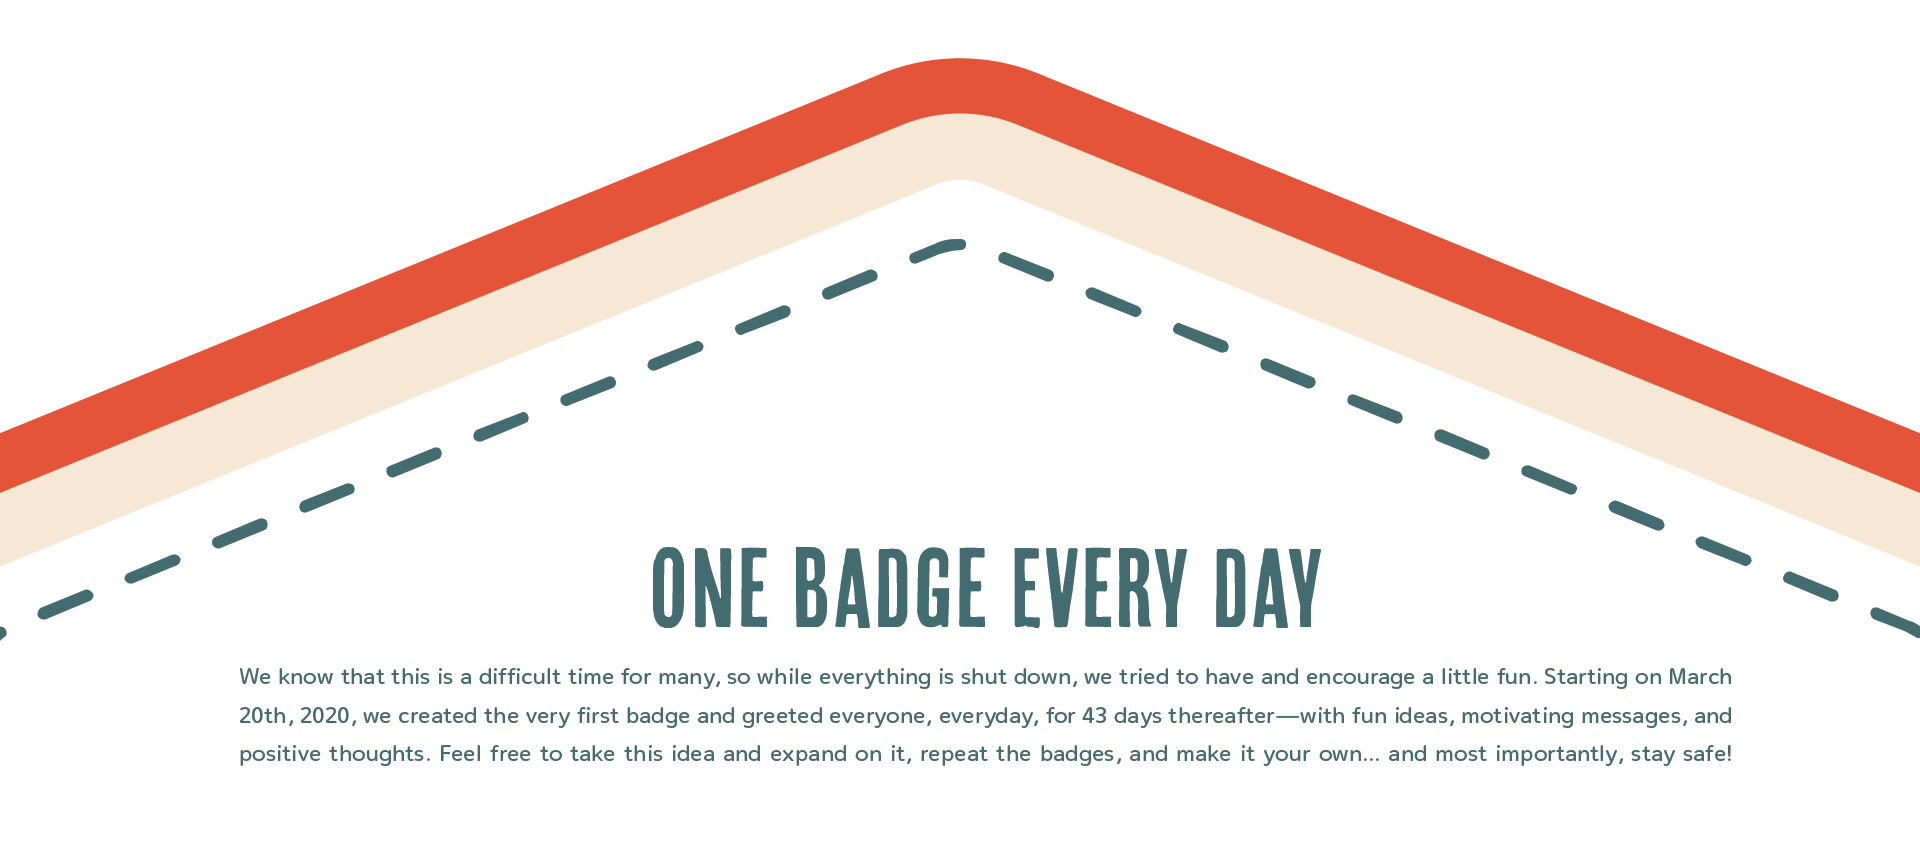 One Badge Every Day